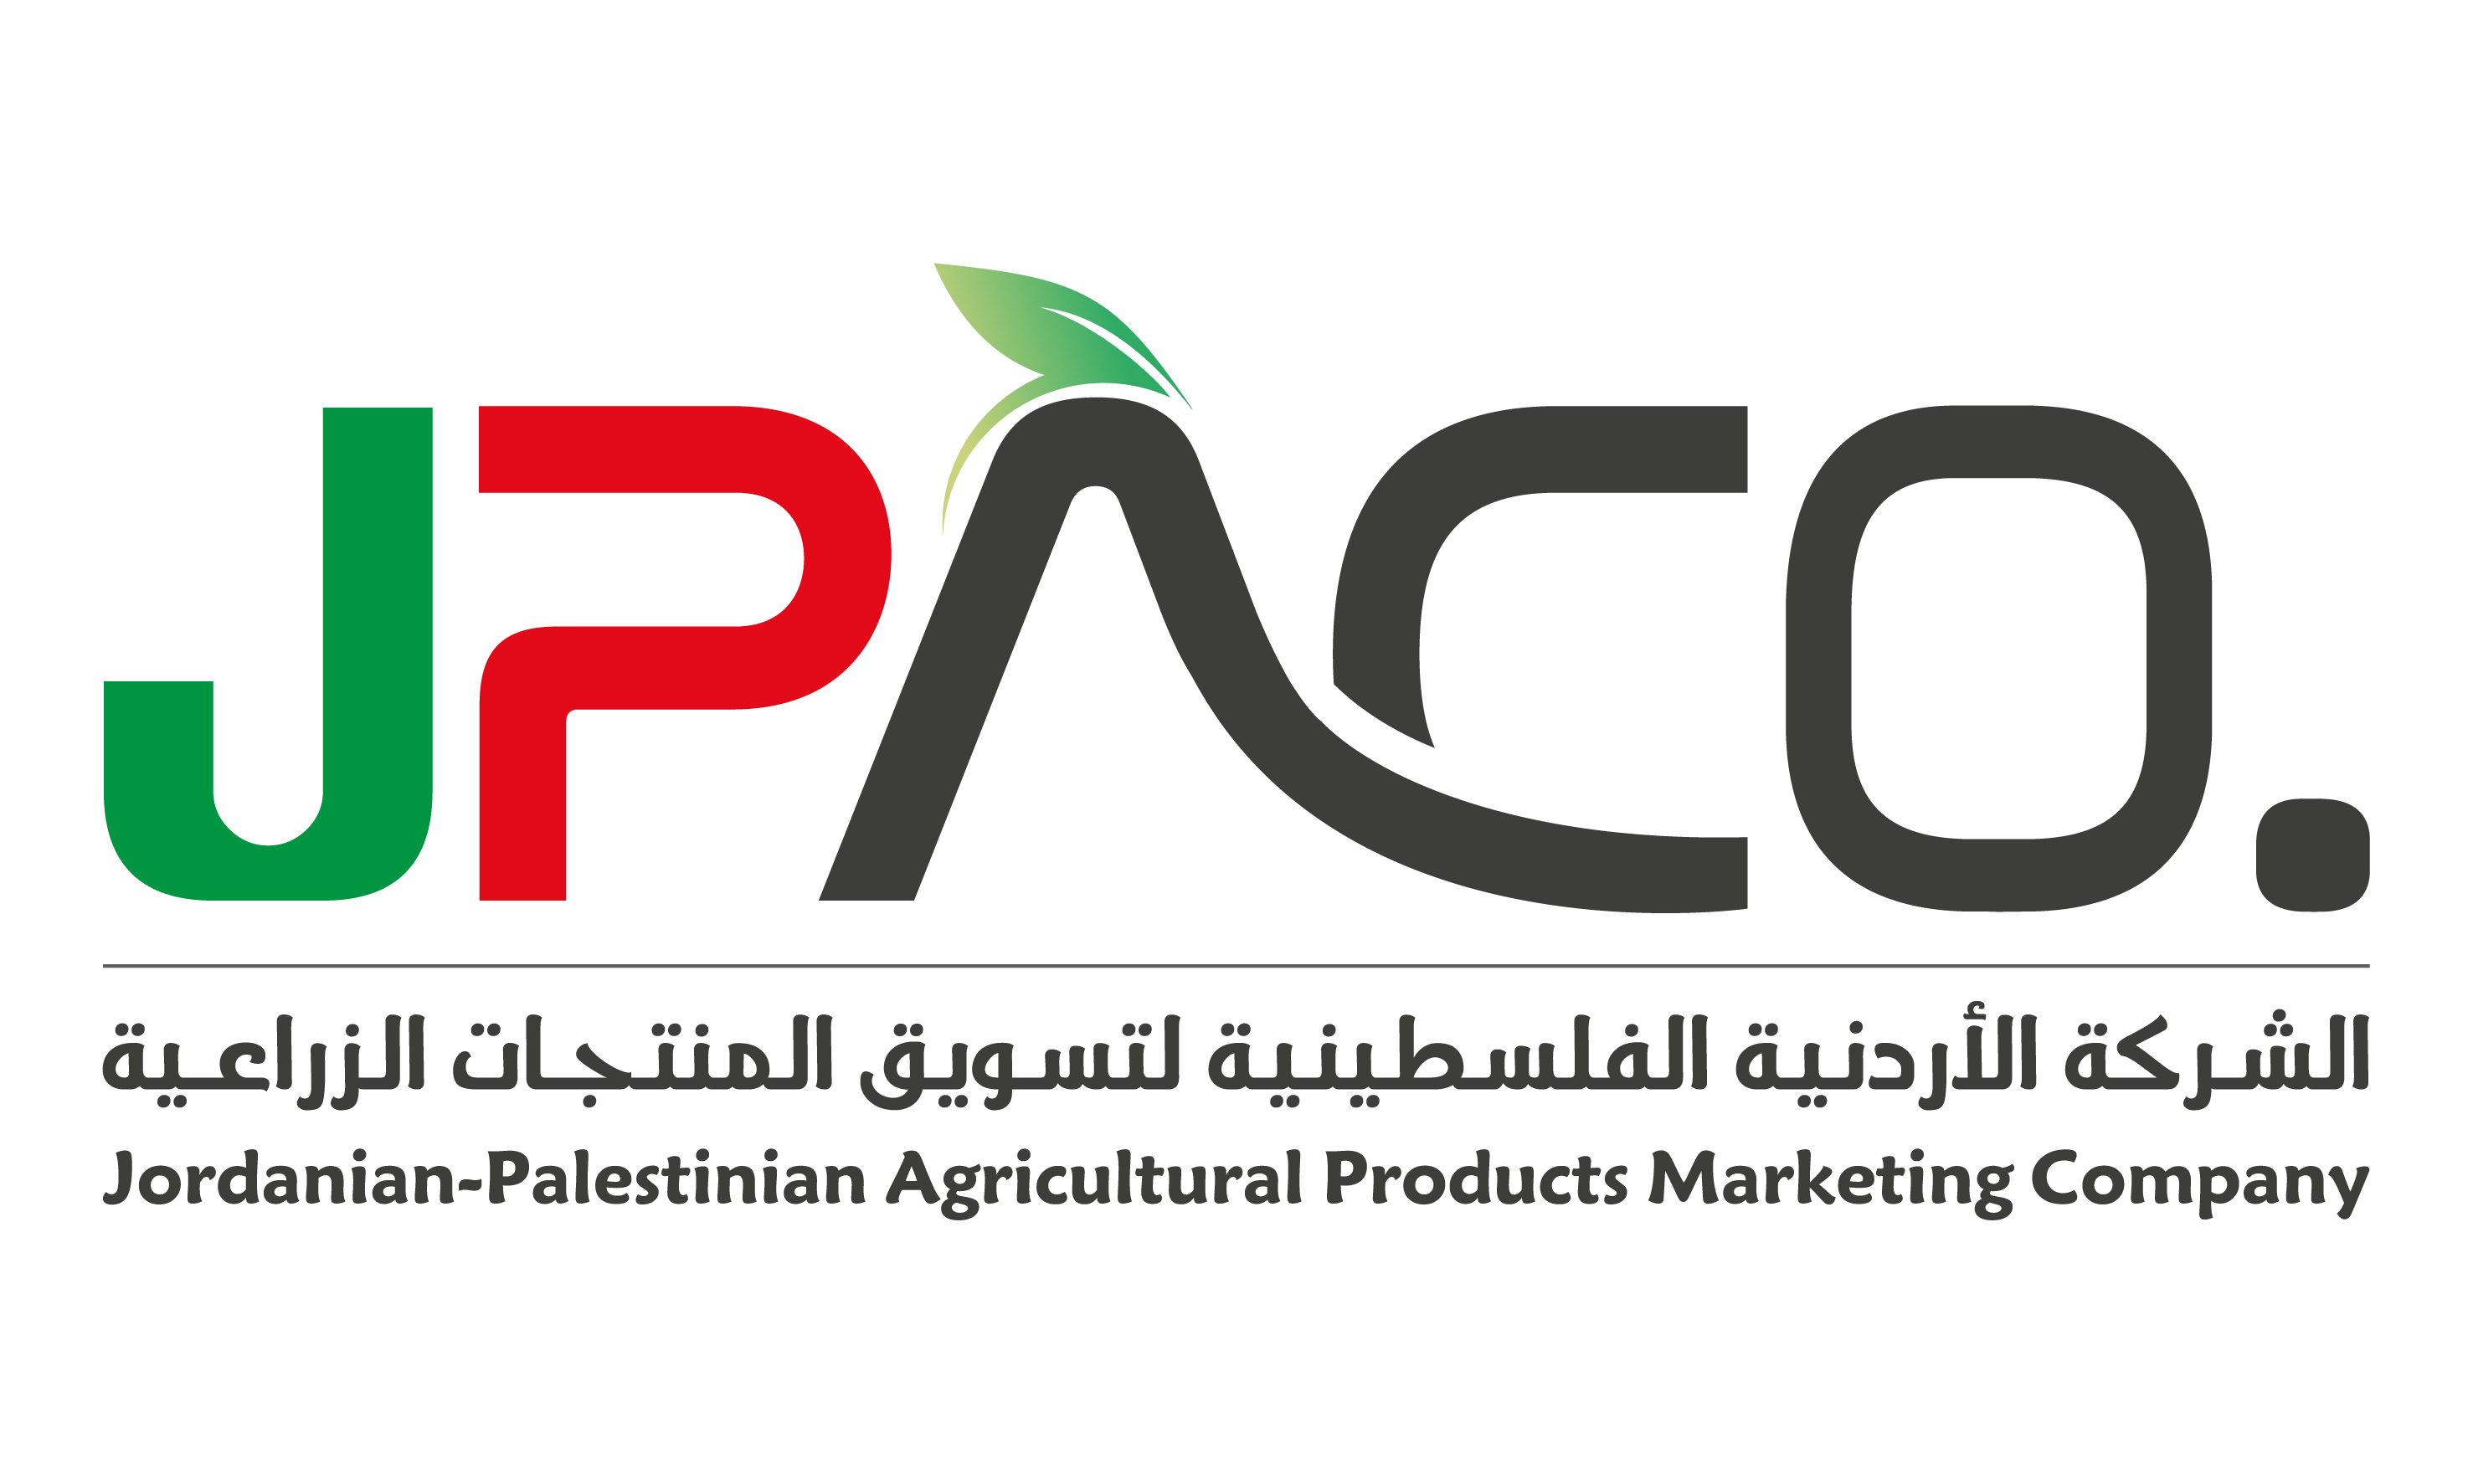 Jordanian Palestinian Agricultural Products Marketing Company \Jpaco